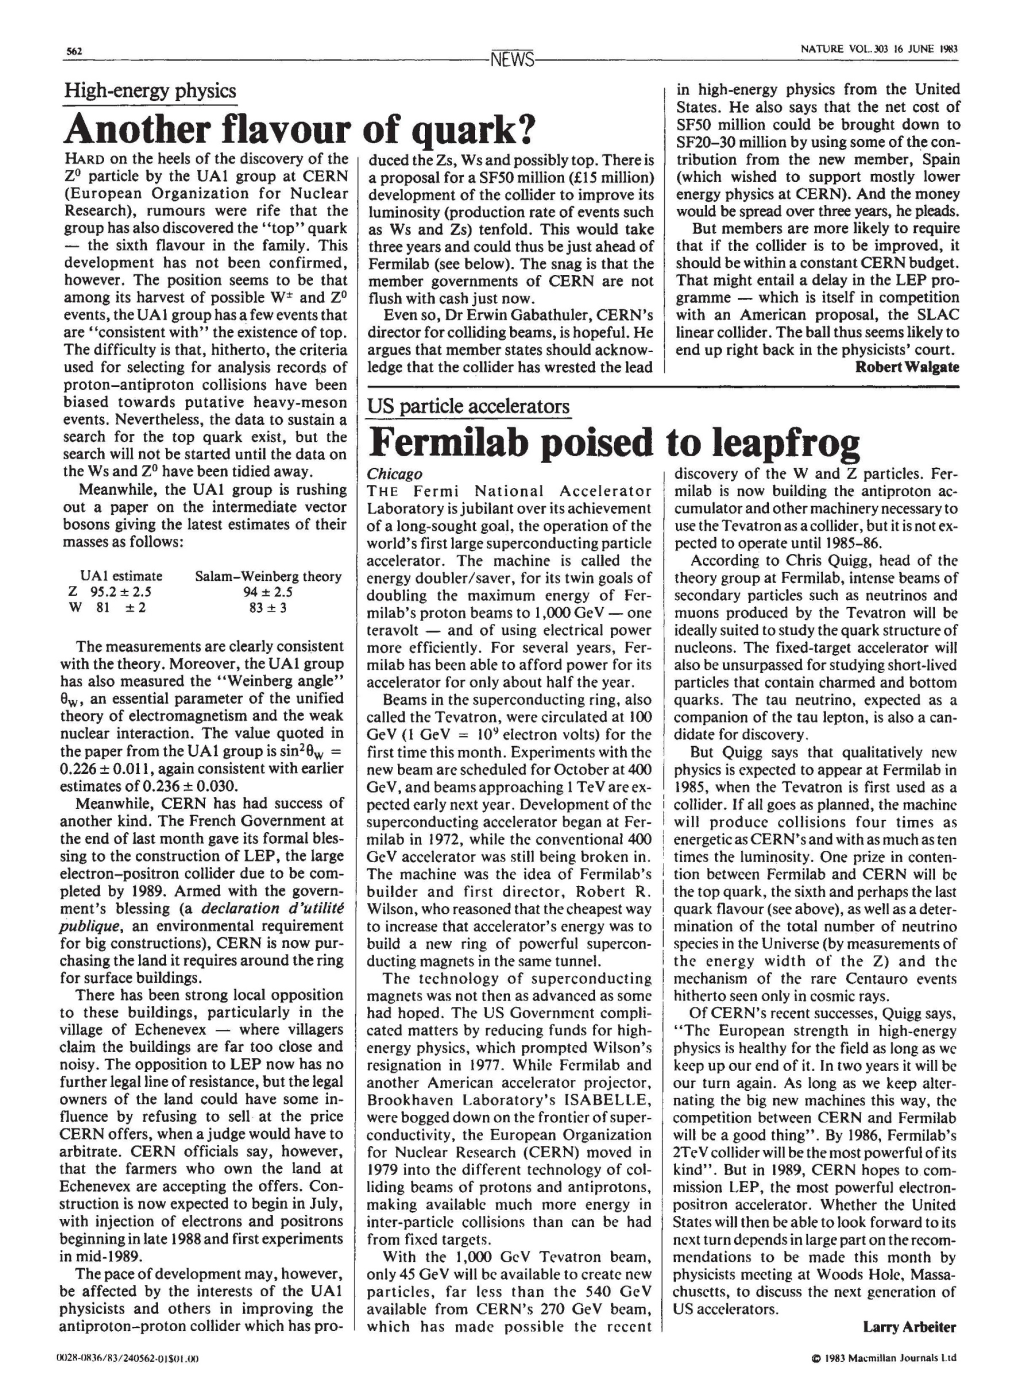 Fermilab Poised to Leapfrog Thews and Zo Have Been Tidied Away